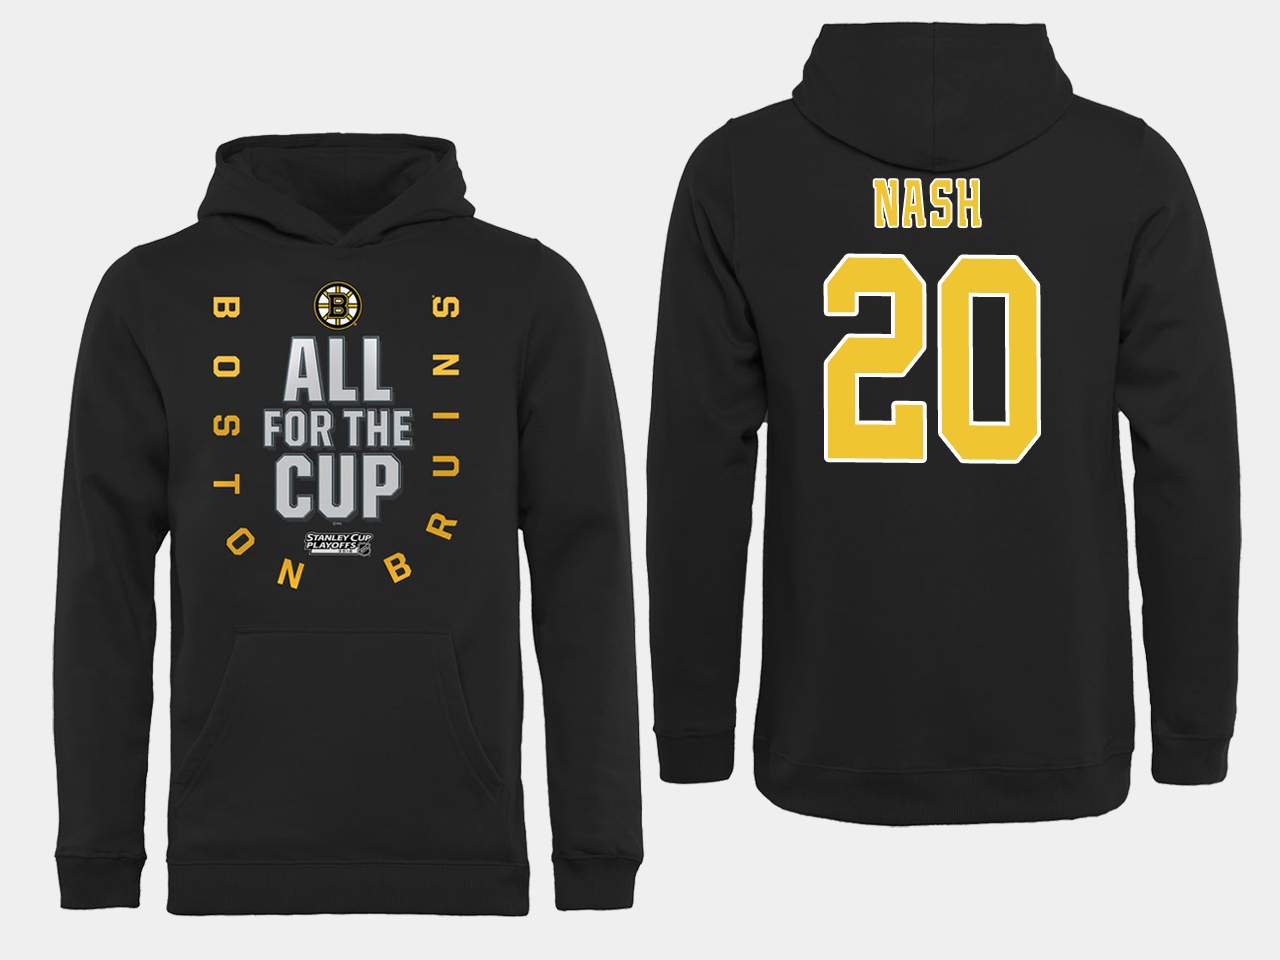 NHL Men Boston Bruins 20 Nash Black All for the Cup Hoodie